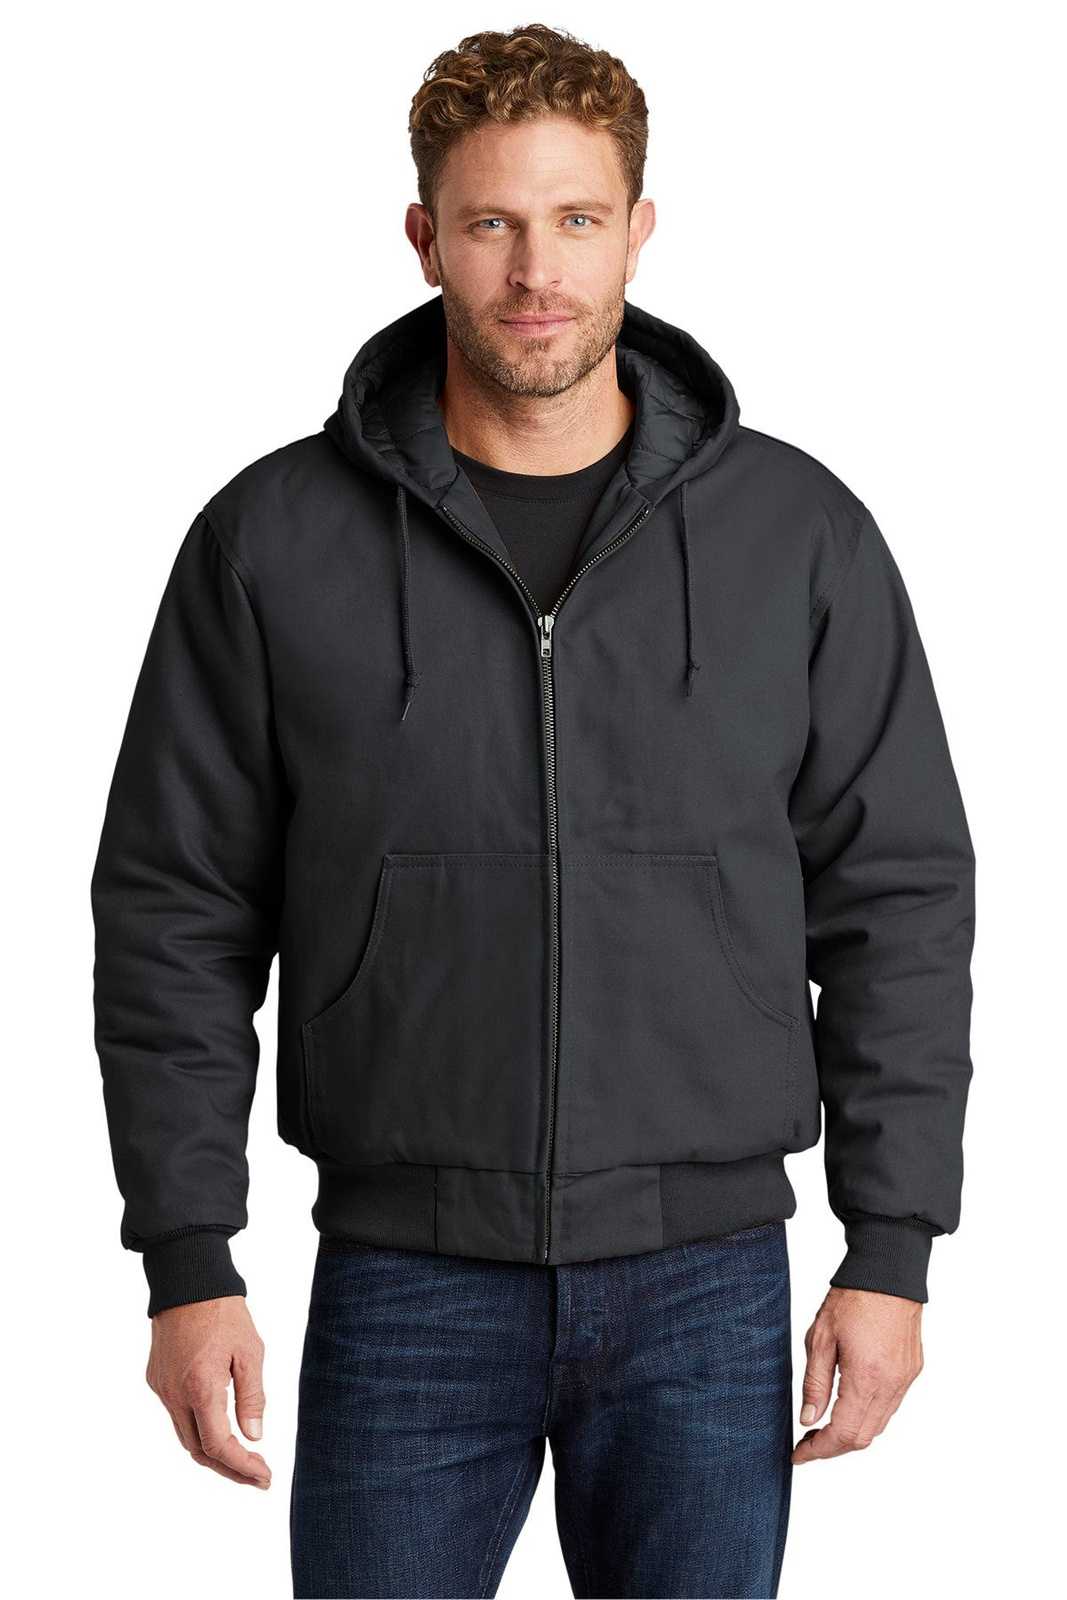 CornerStone J763H Duck Cloth Hooded Work Jacket - Charcoal - HIT a Double - 1